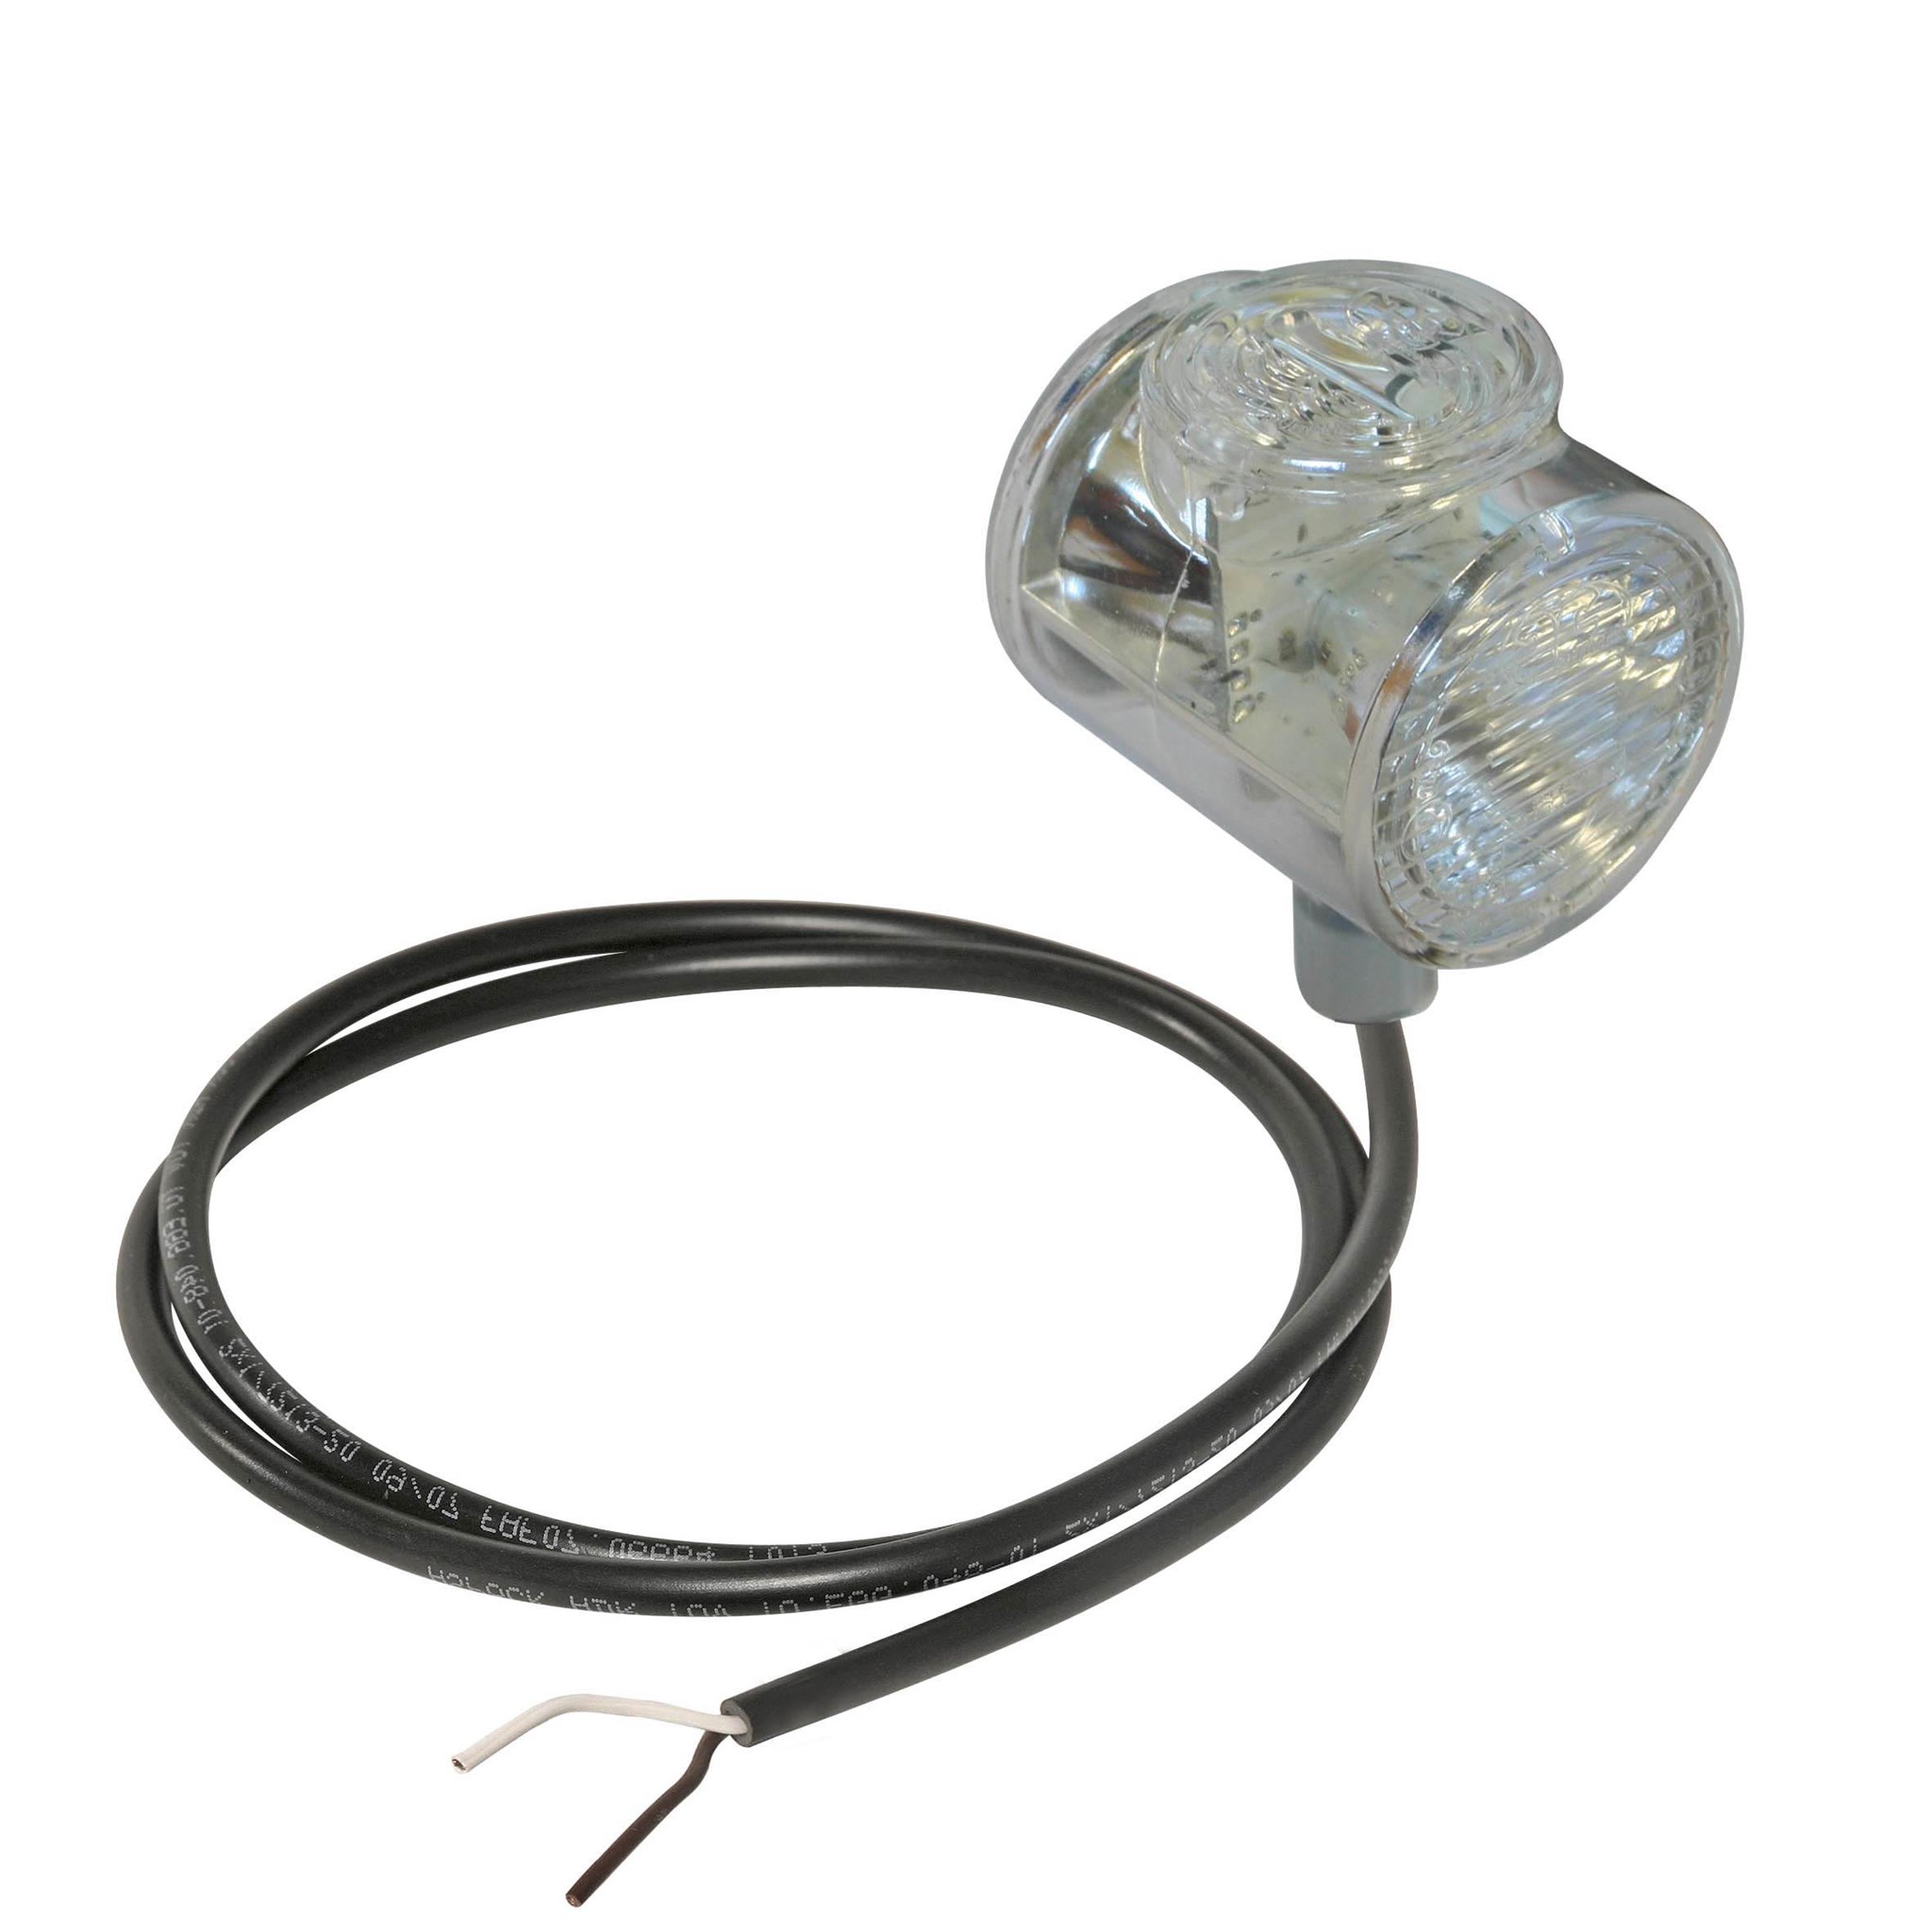 Picture of 21-3351-707 Aspöck Superpoint III LED Einsatz r/w/o 4m Kabel Open End